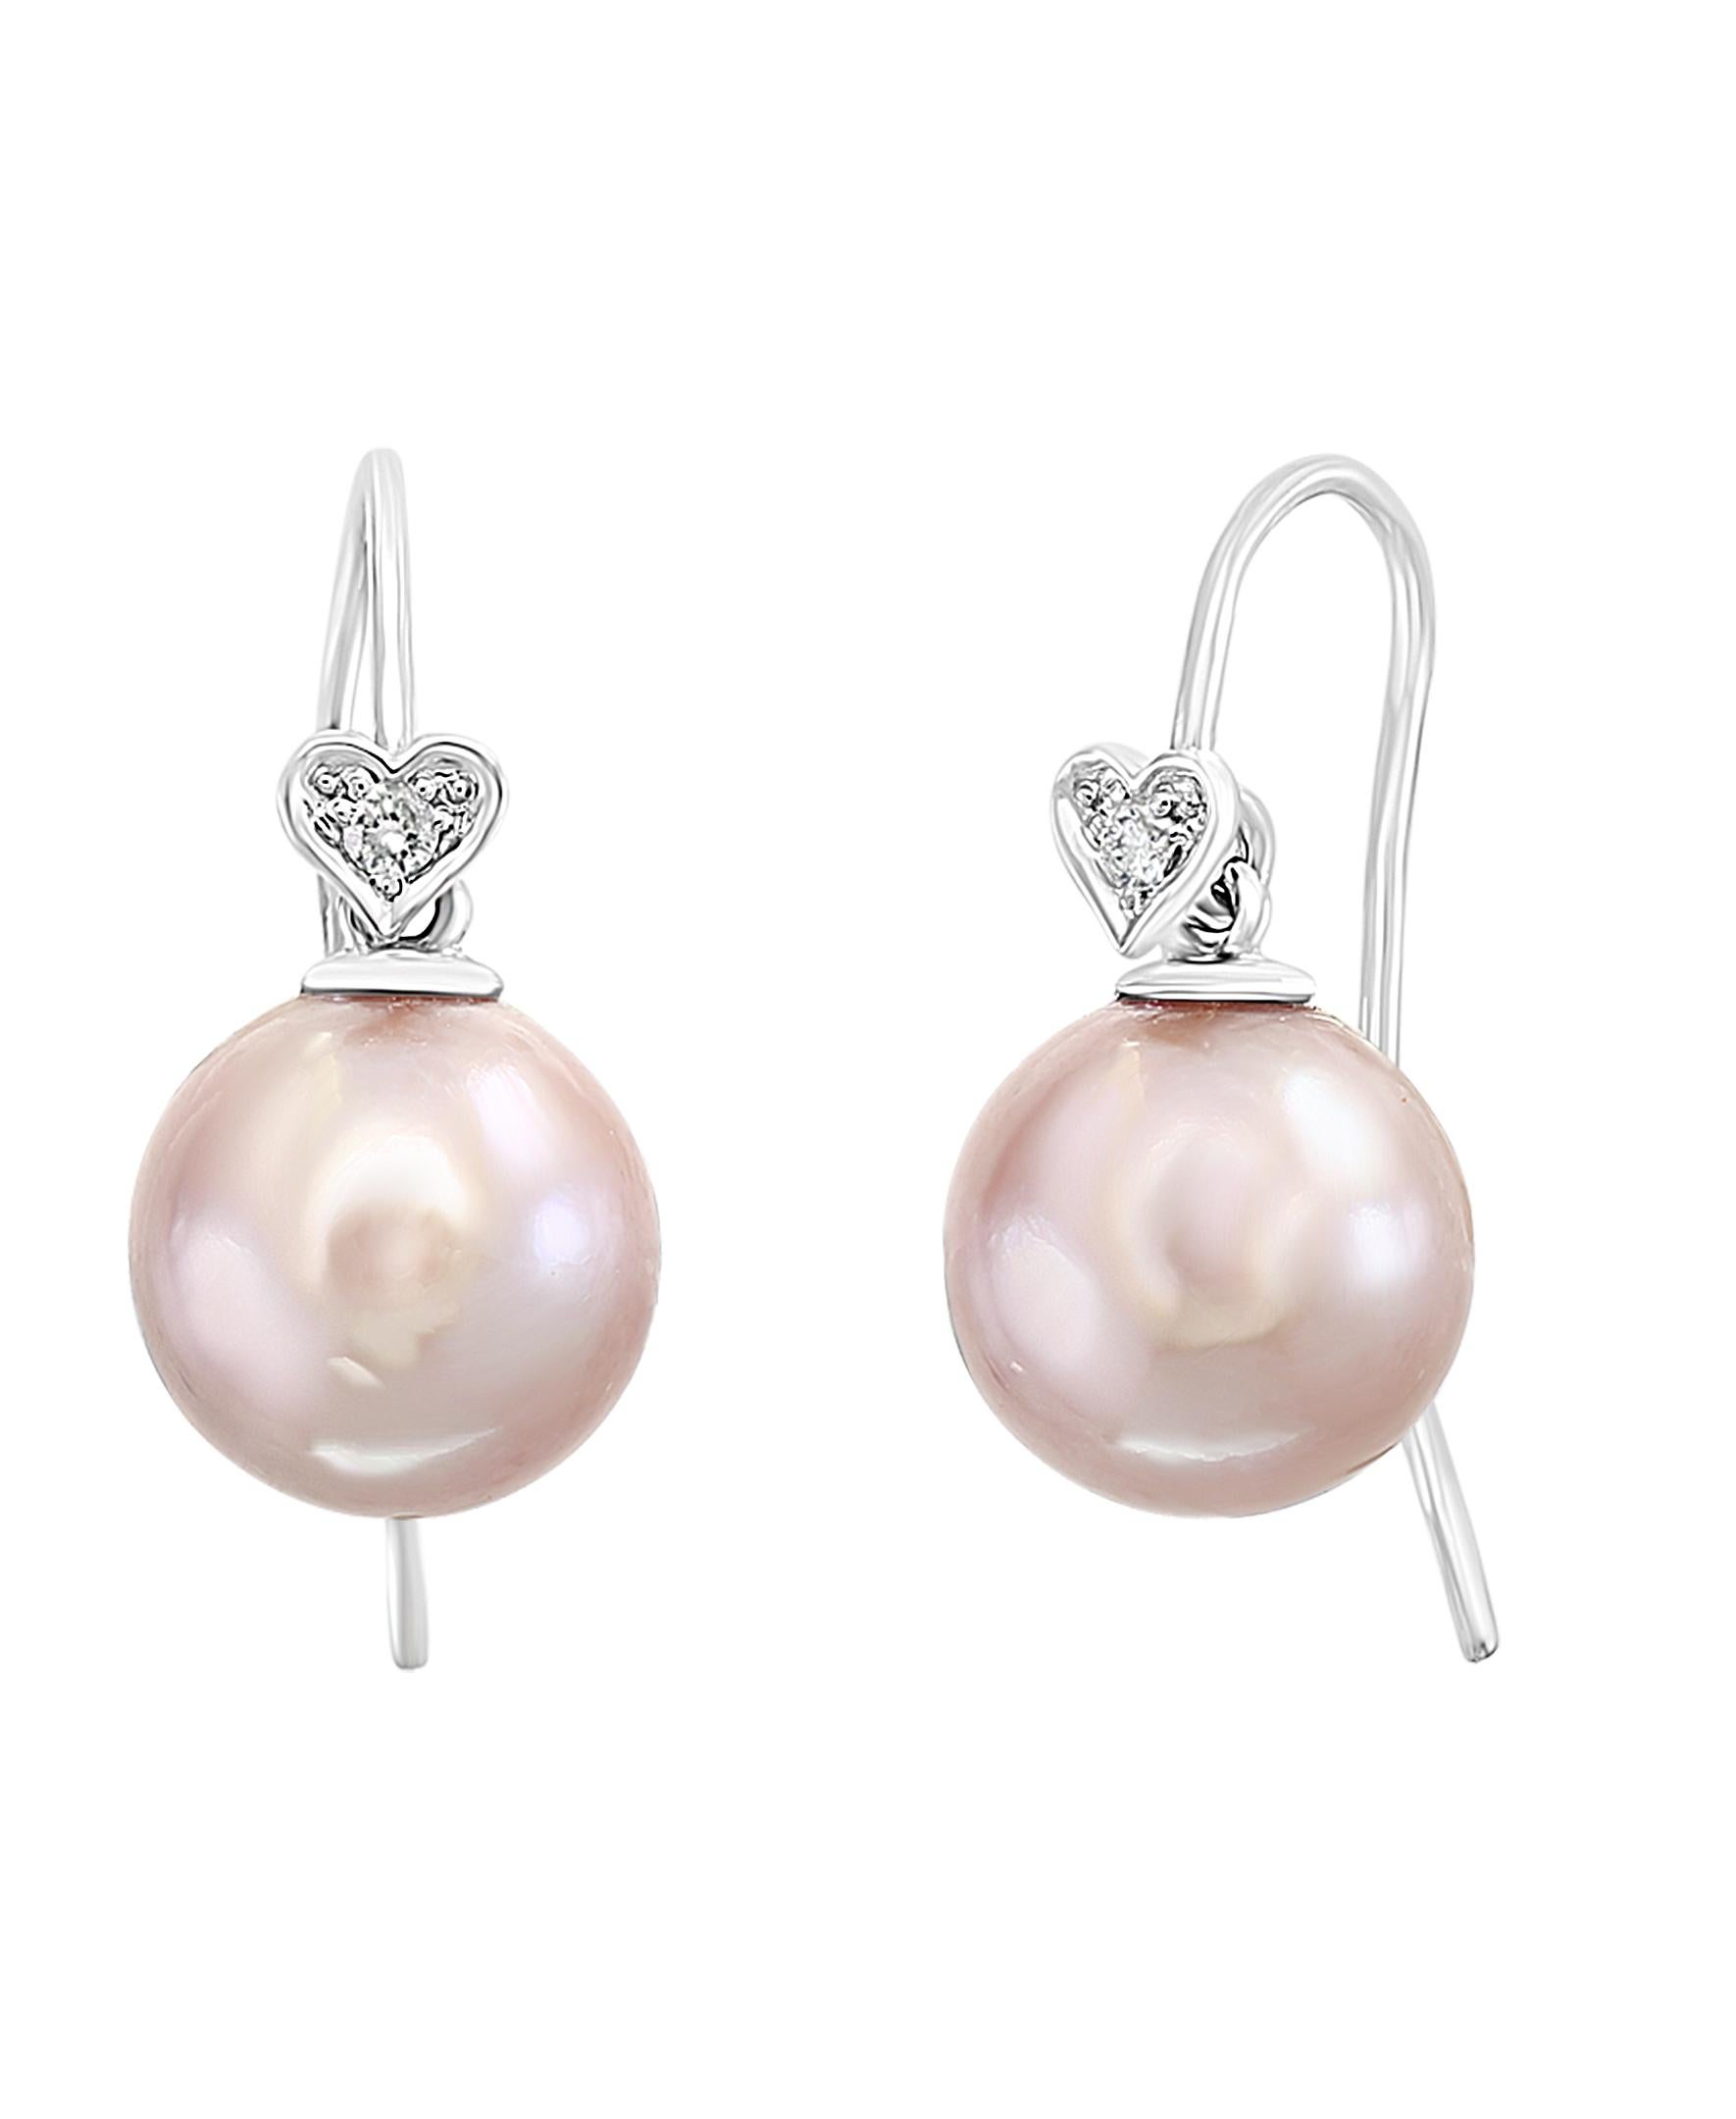 These elegant Diamond and Pearl earrings contain Chinese Freshwater natural-color pink cultured round pearls measuring 10-11mm set on 14K white gold and diamond hearts with 0.06 carats of diamonds. Simple, yet elegant, these earrings are a great